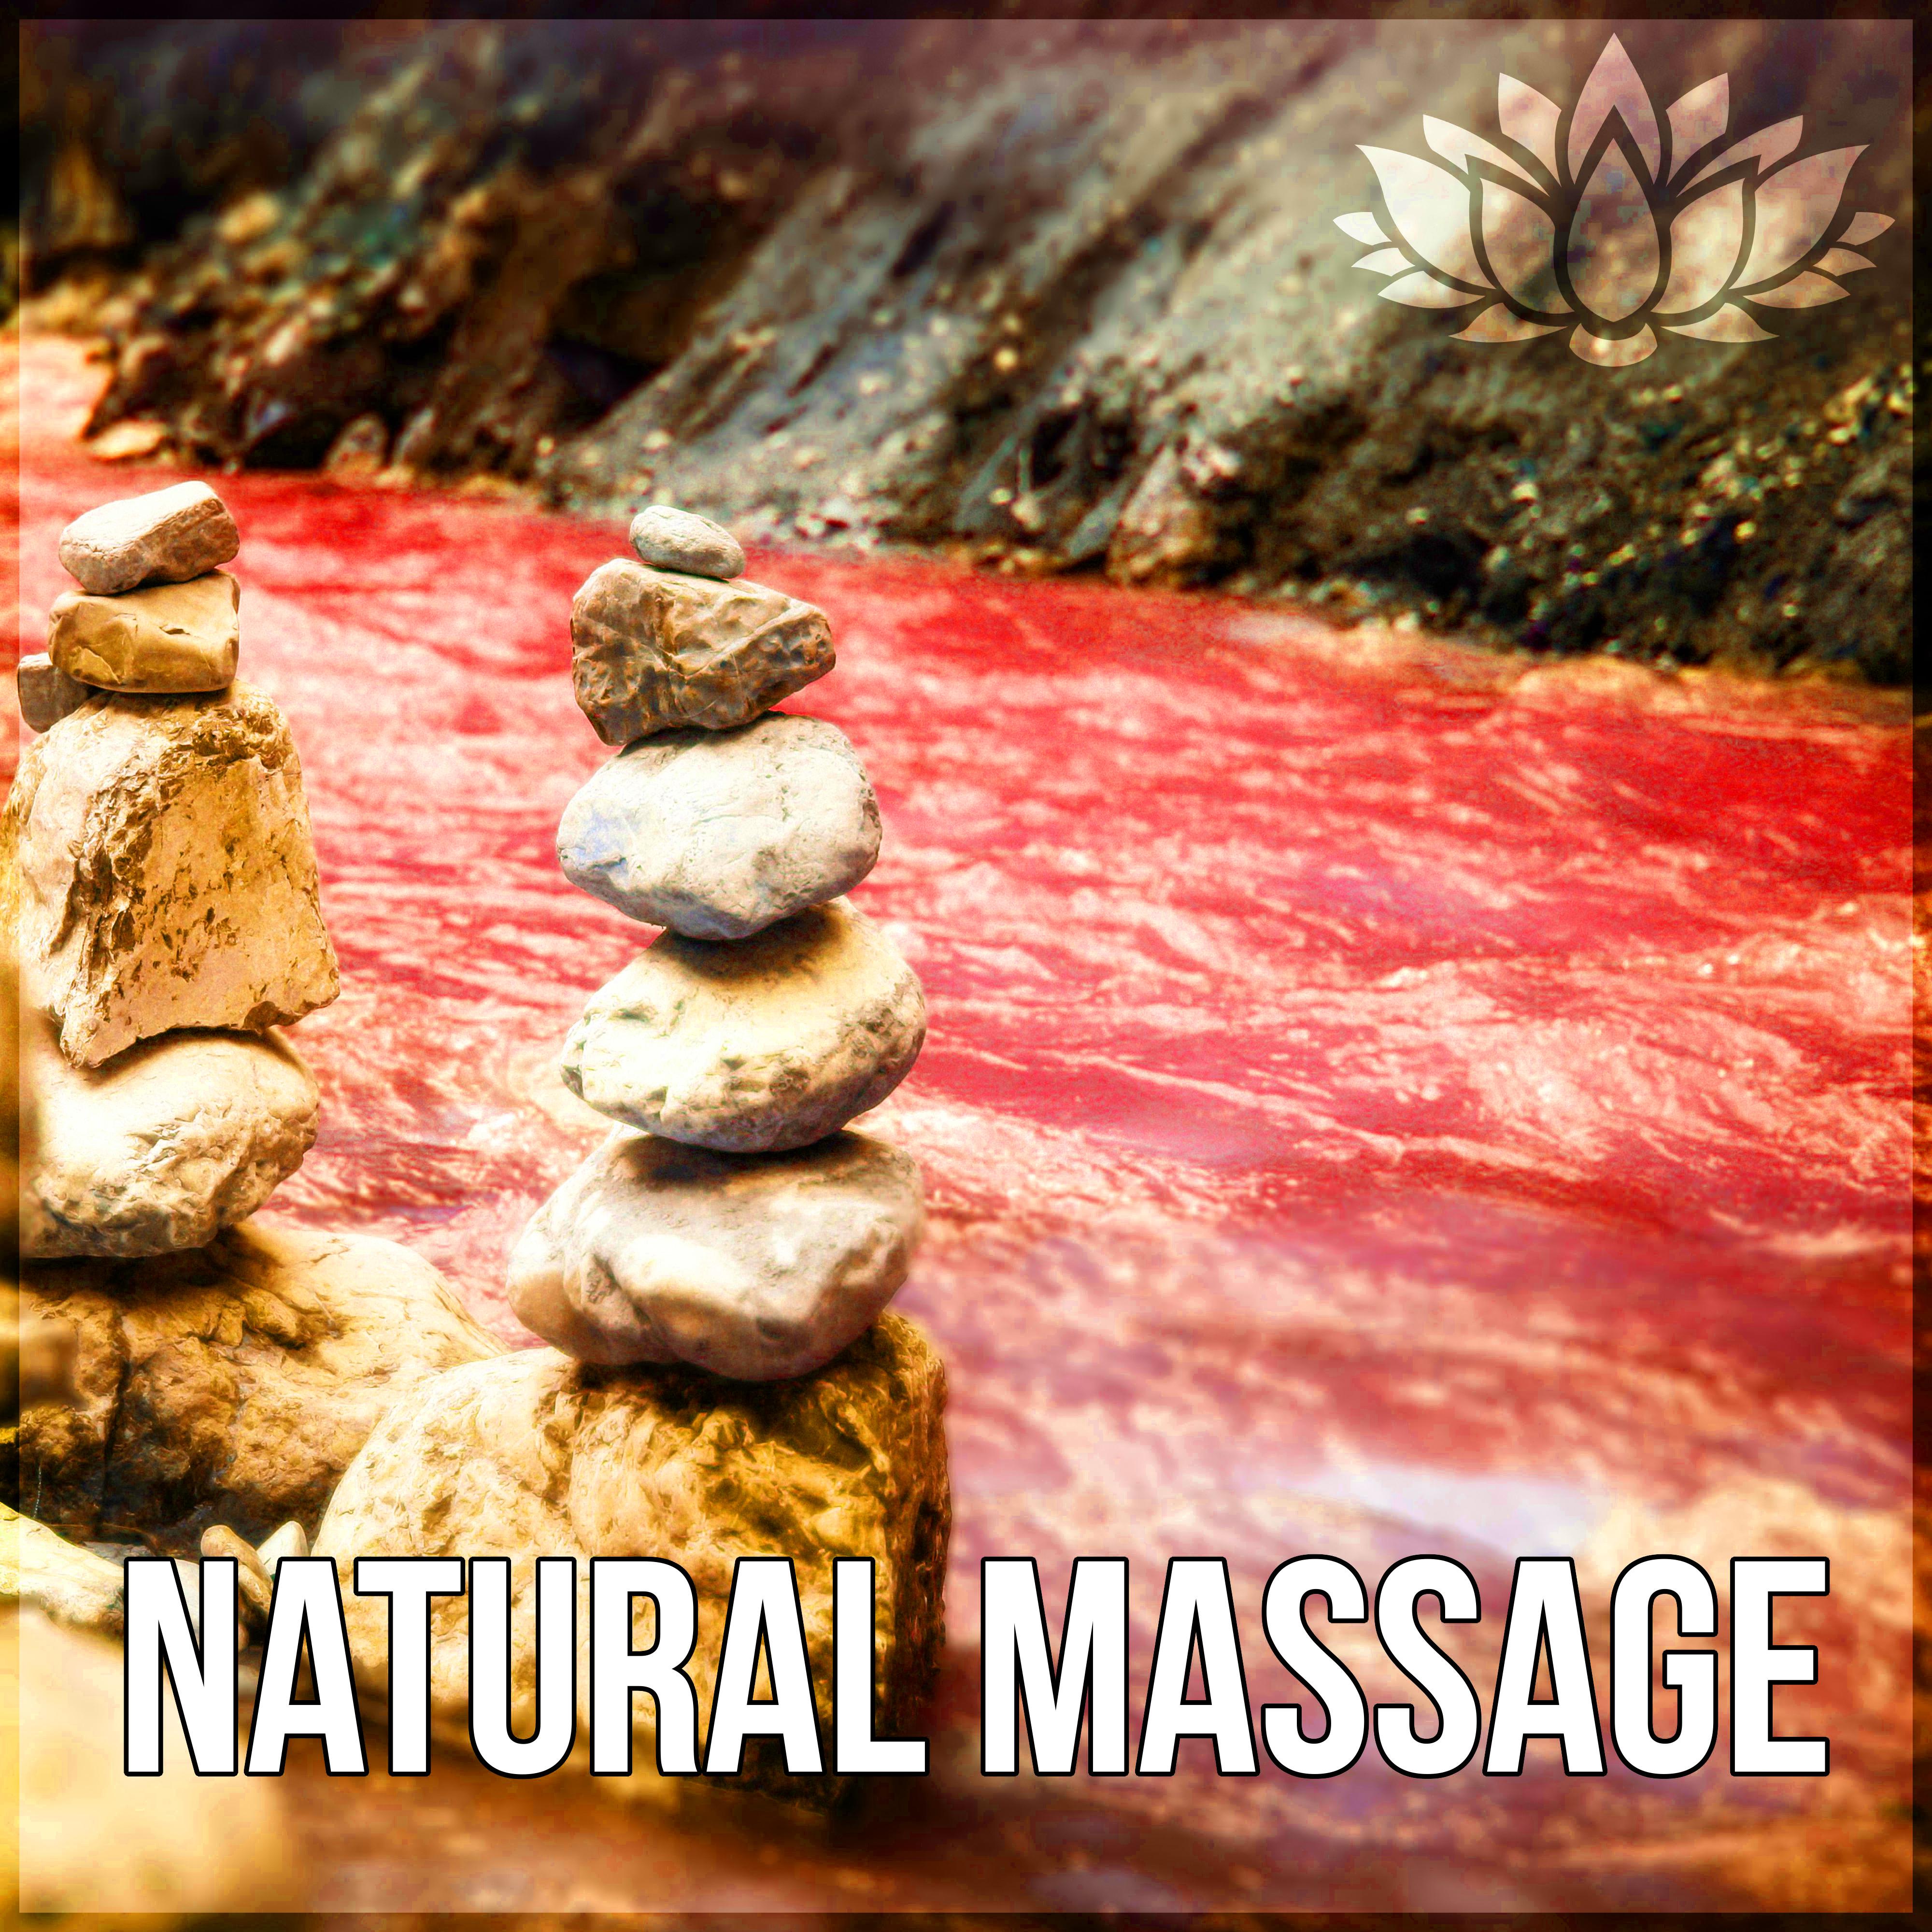 Natural Massage - Therapy Music, Sounds of Nature, Healing Music, Relaxing Massage, Inner Silence, Gentle Touch